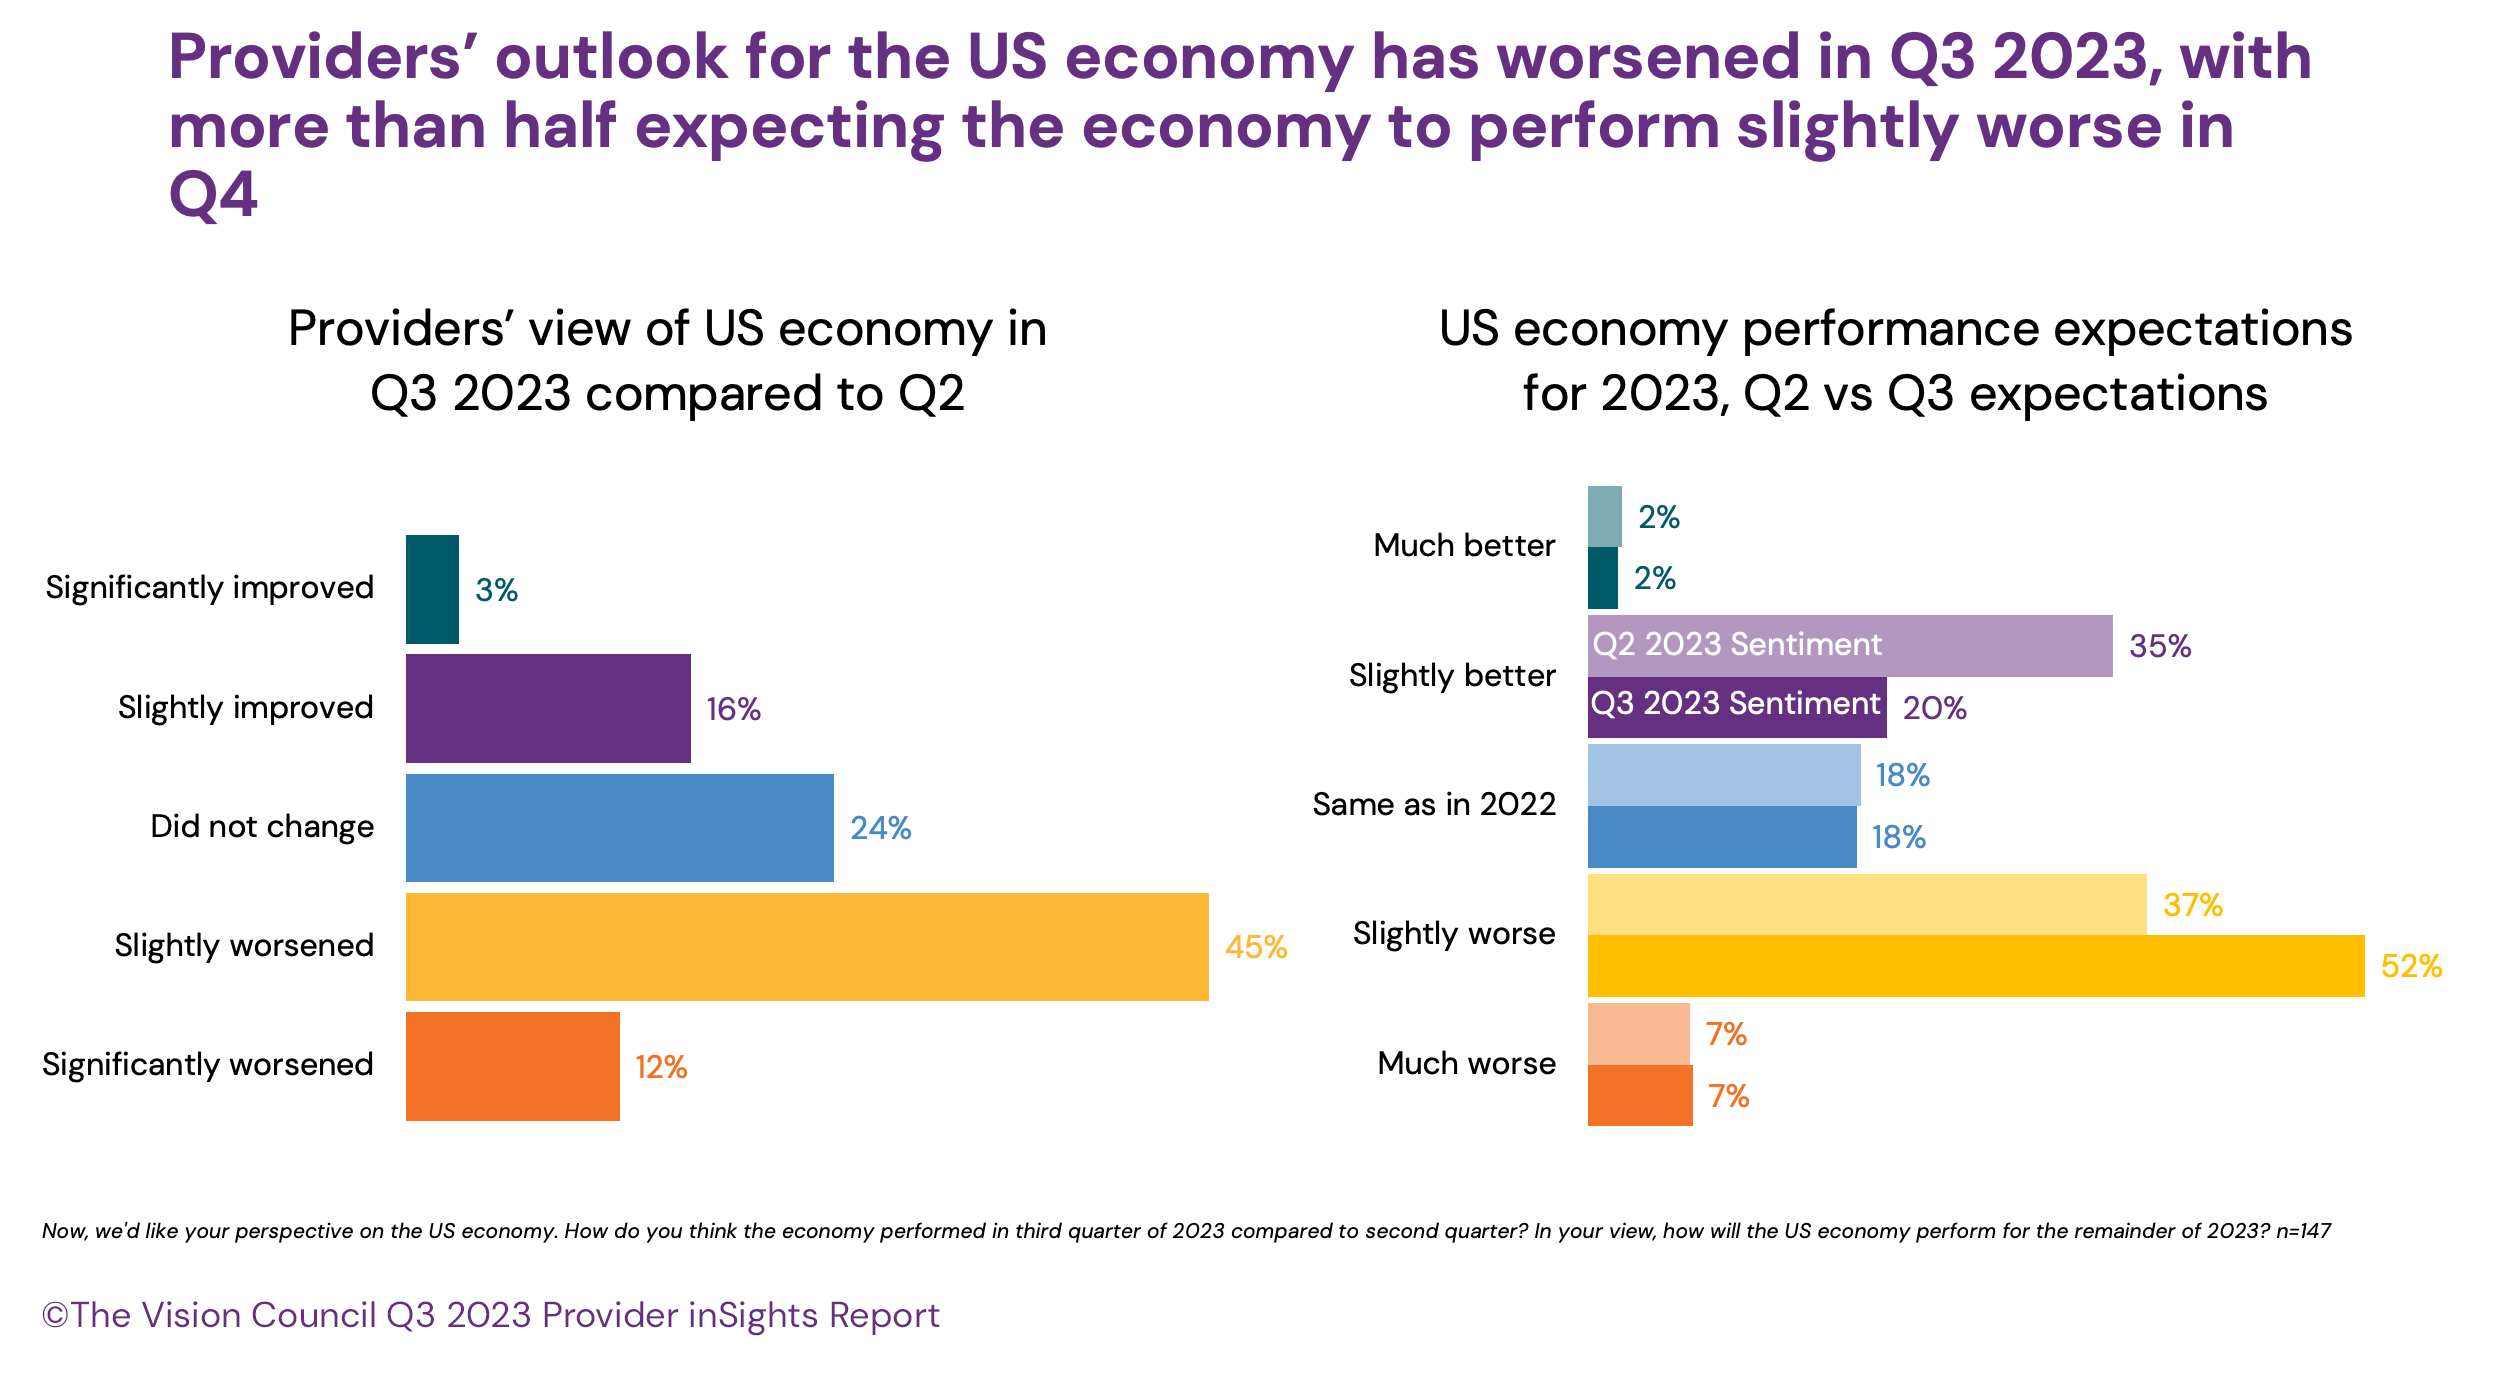 Providers' outlook for the US economy has worsened in Q3 2023, with more than half expecting the economy to perform slightly worse in Q4